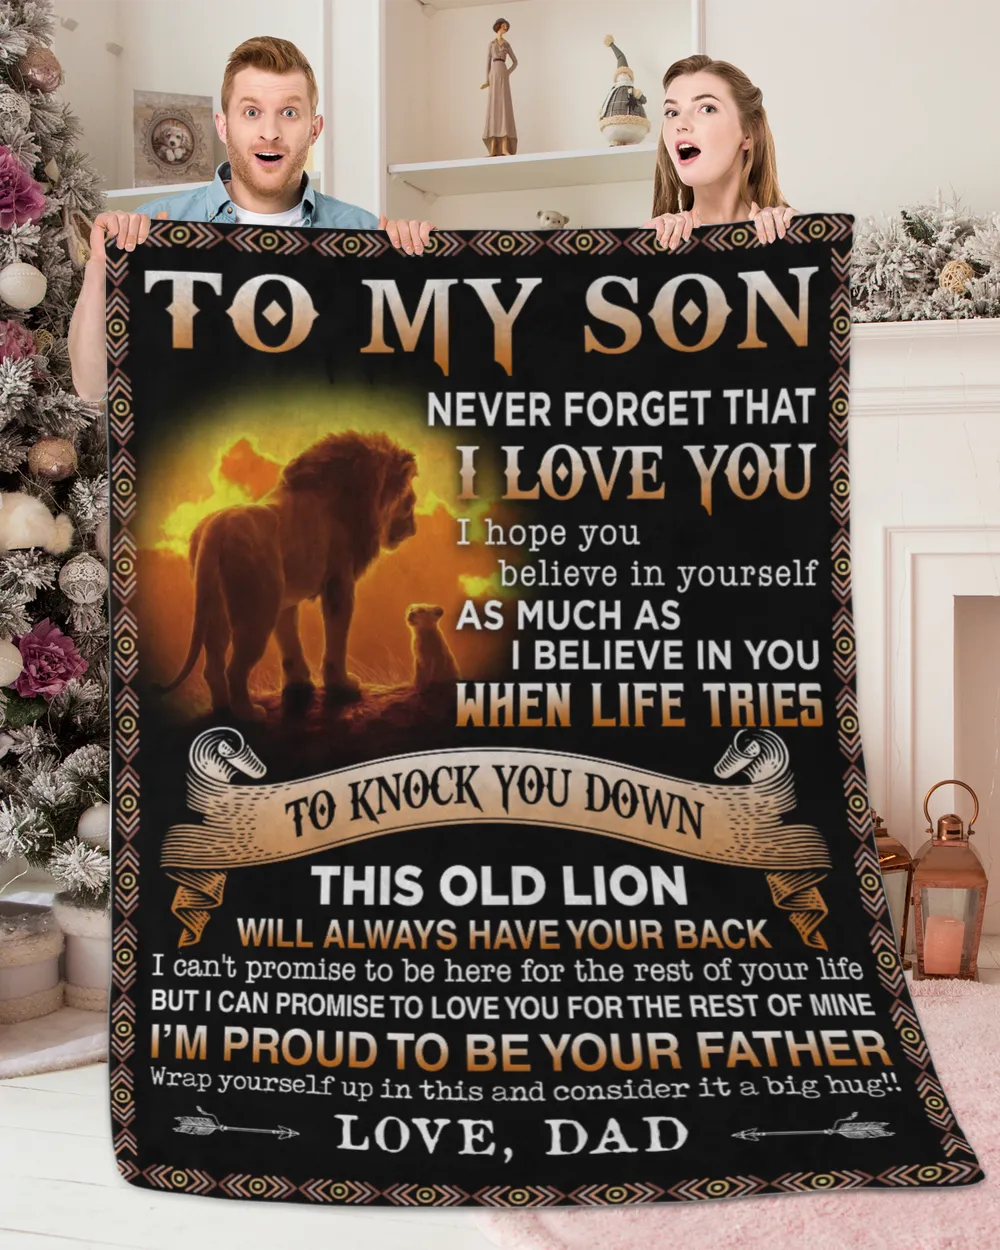 To my Son